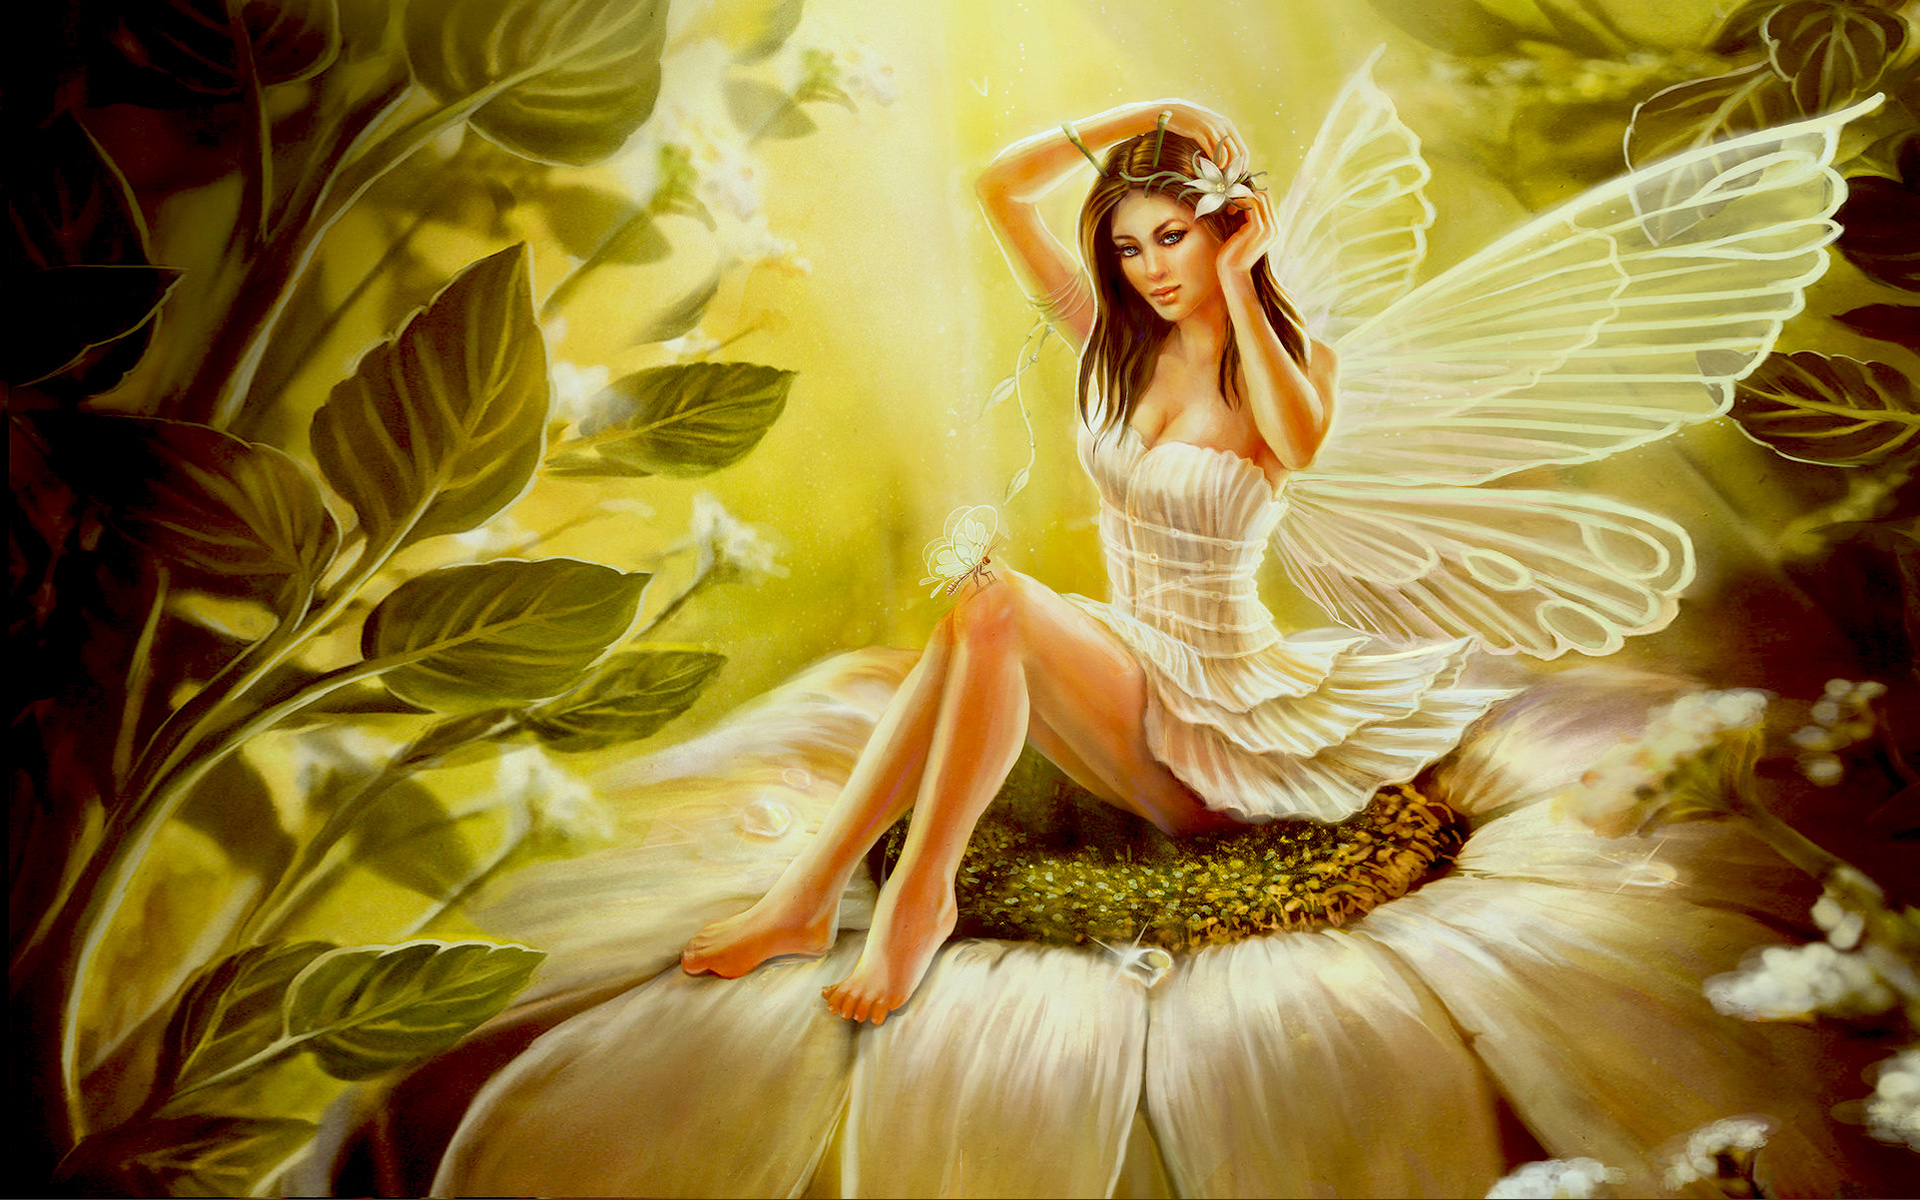 Girl With Wings Of A Butterfly Flower In Her Hair Green Leaves Fantasy